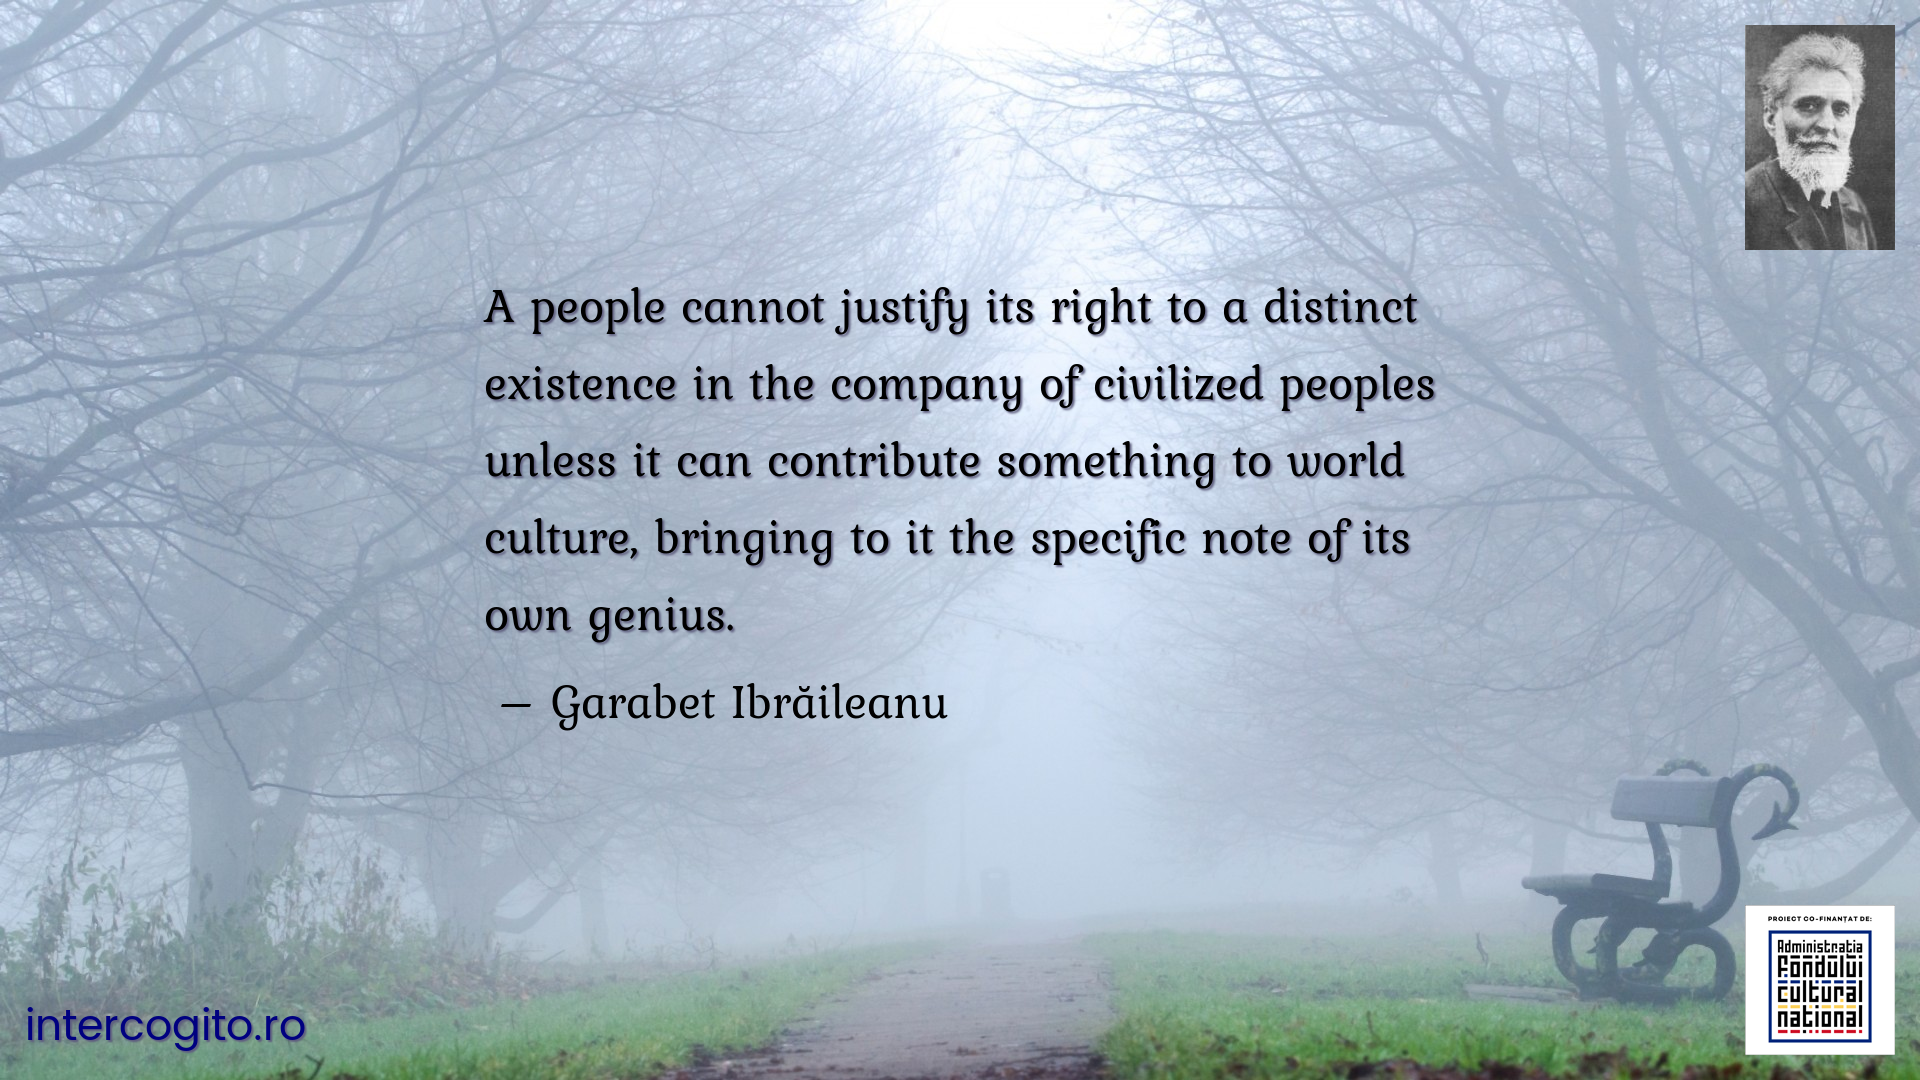 A people cannot justify its right to a distinct existence in the company of civilized peoples unless it can contribute something to world culture, bringing to it the specific note of its own genius.